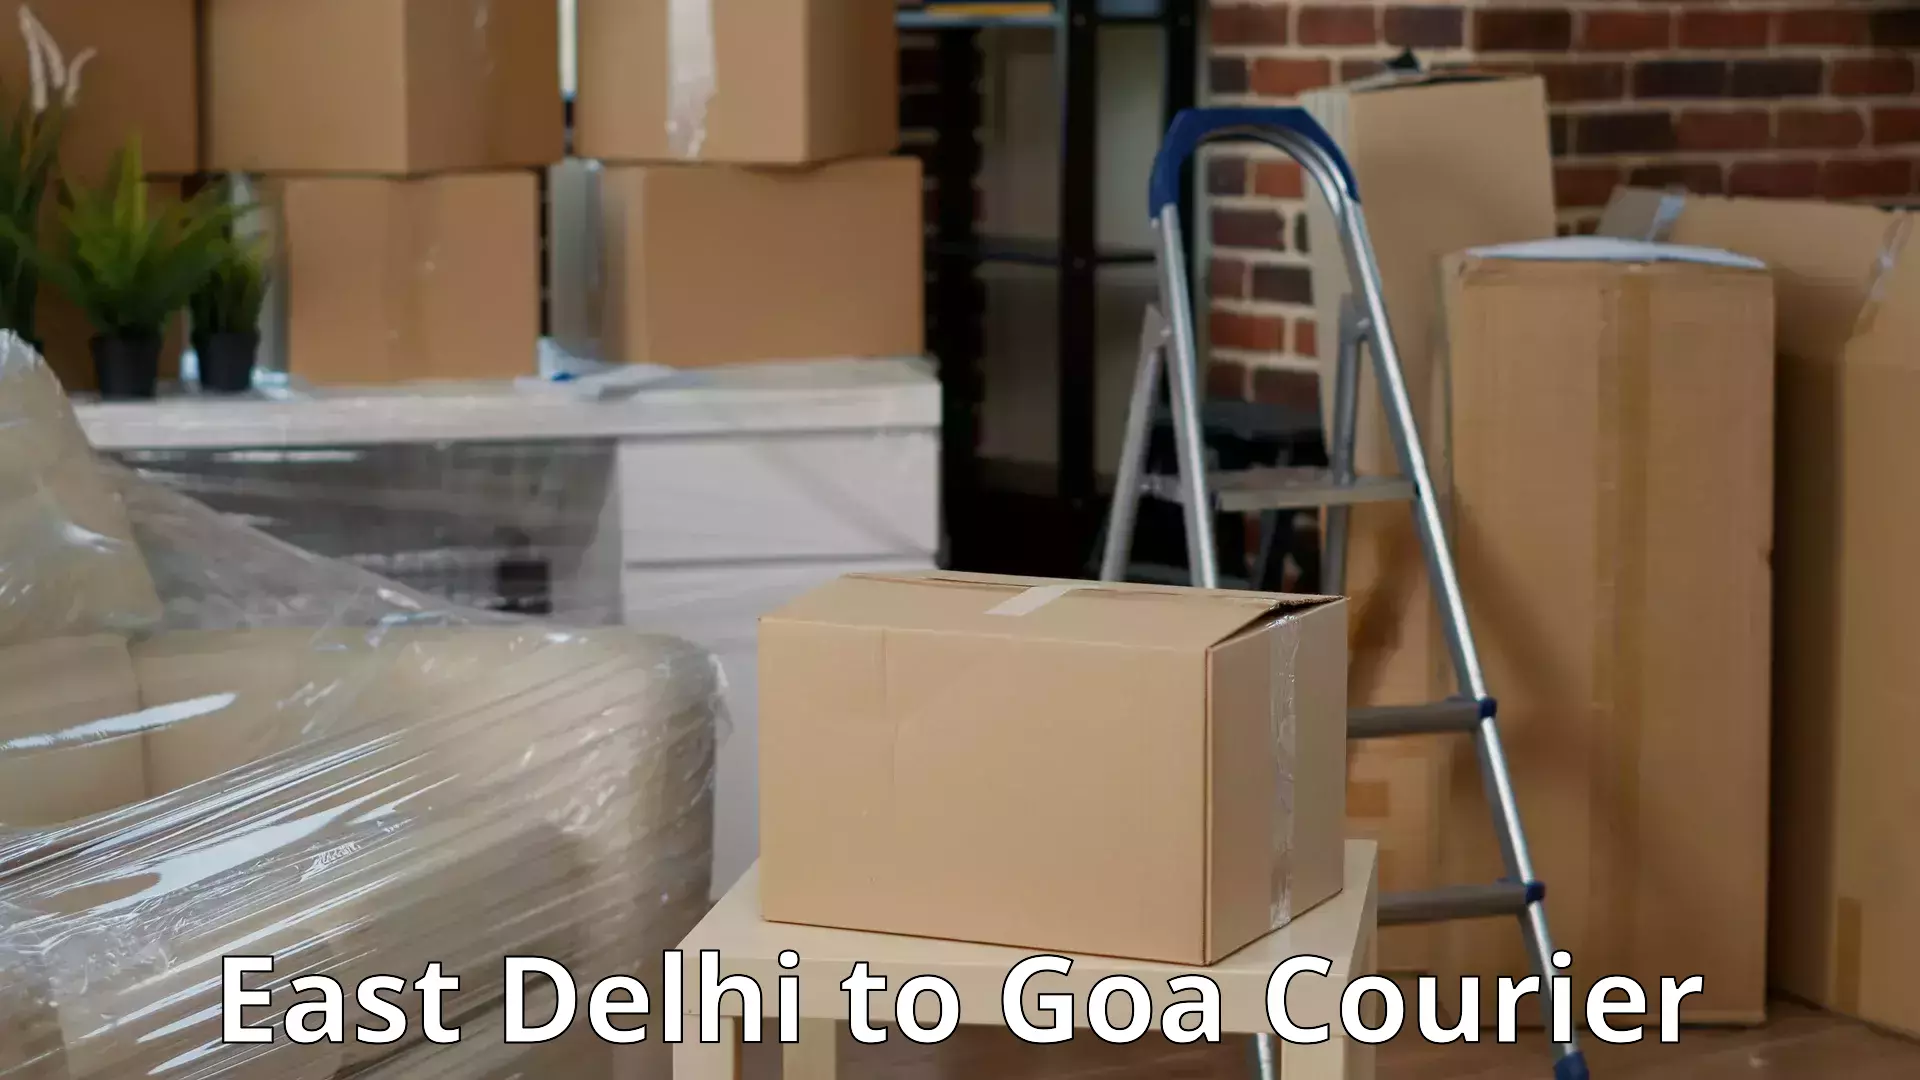 Trusted relocation services East Delhi to Goa